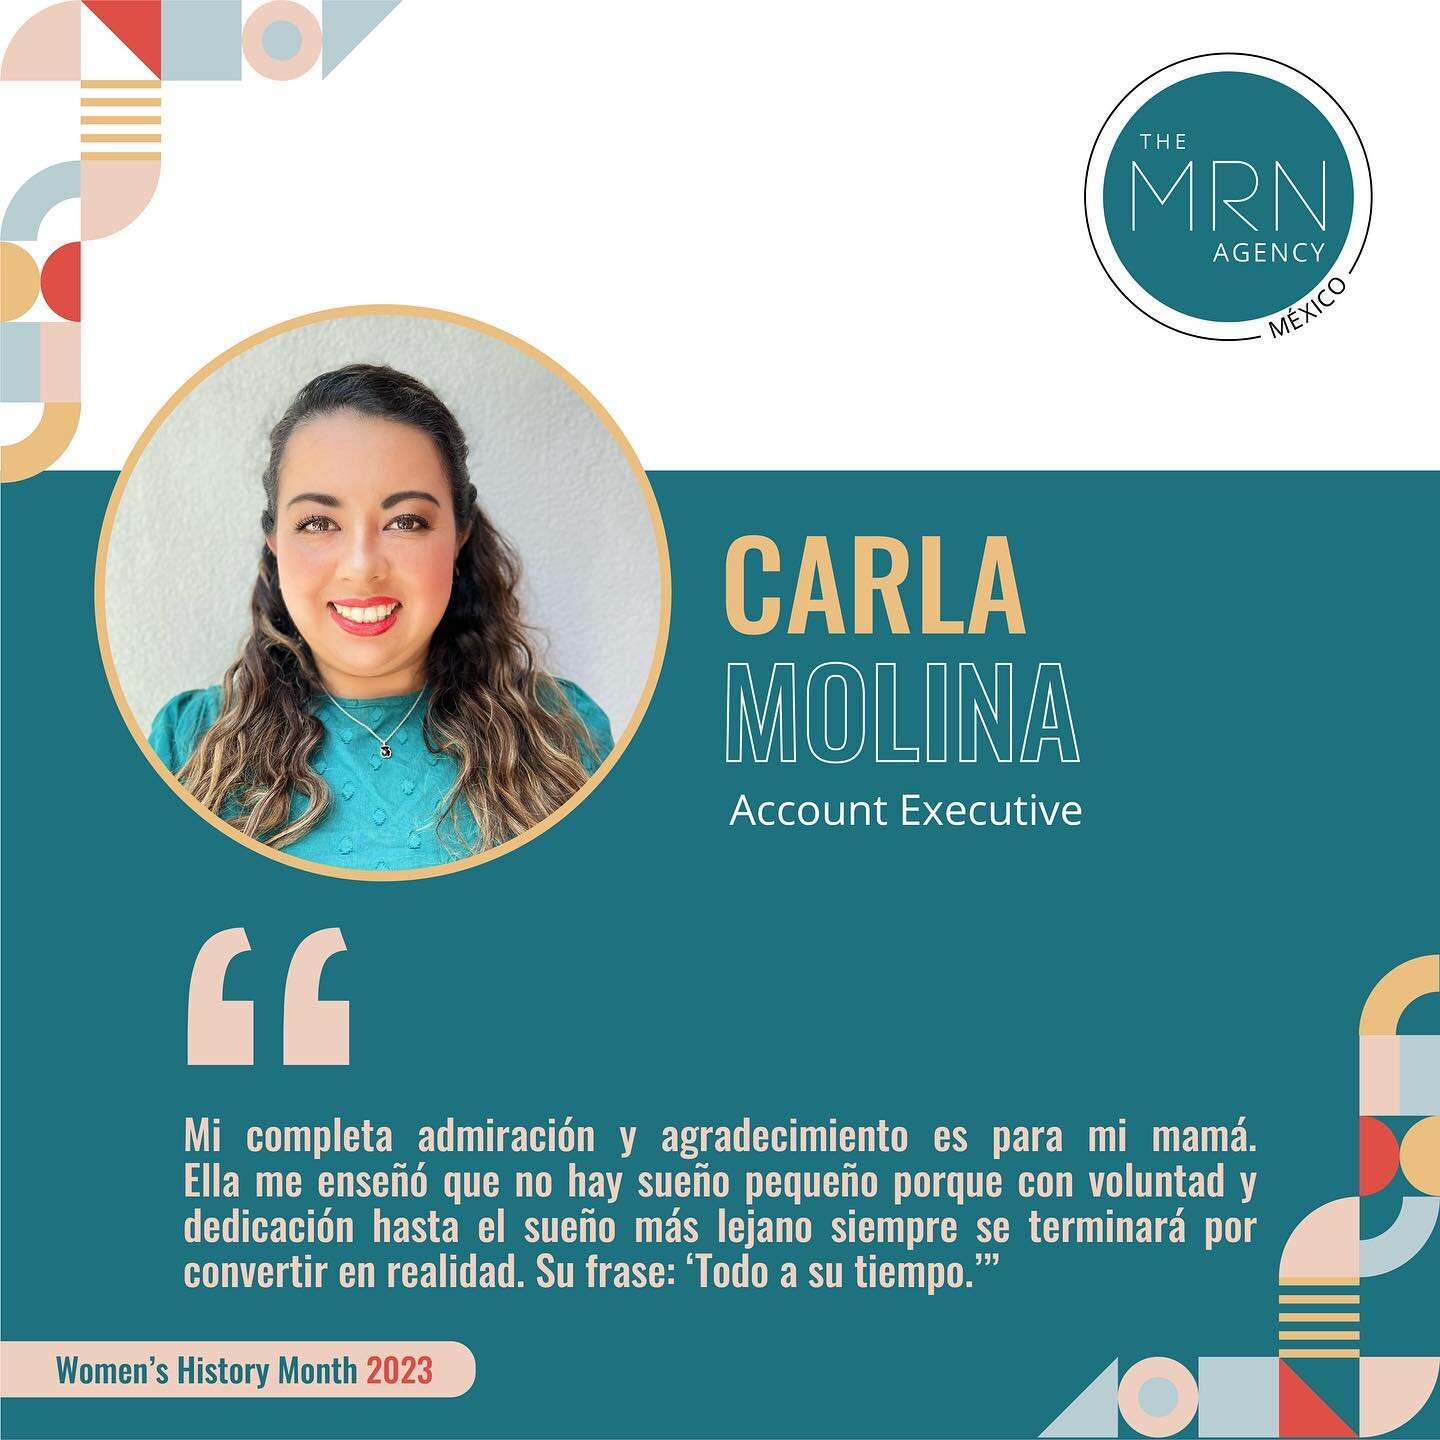 MRN is celebrating Women&rsquo;s History Month by highlighting the women who&rsquo;ve inspired our team!

Carla Molina, one of our Account Executives, is inspired by her mom.

&ldquo;Mi completa admiraci&oacute;n y agradecimiento es para mi mam&aacut